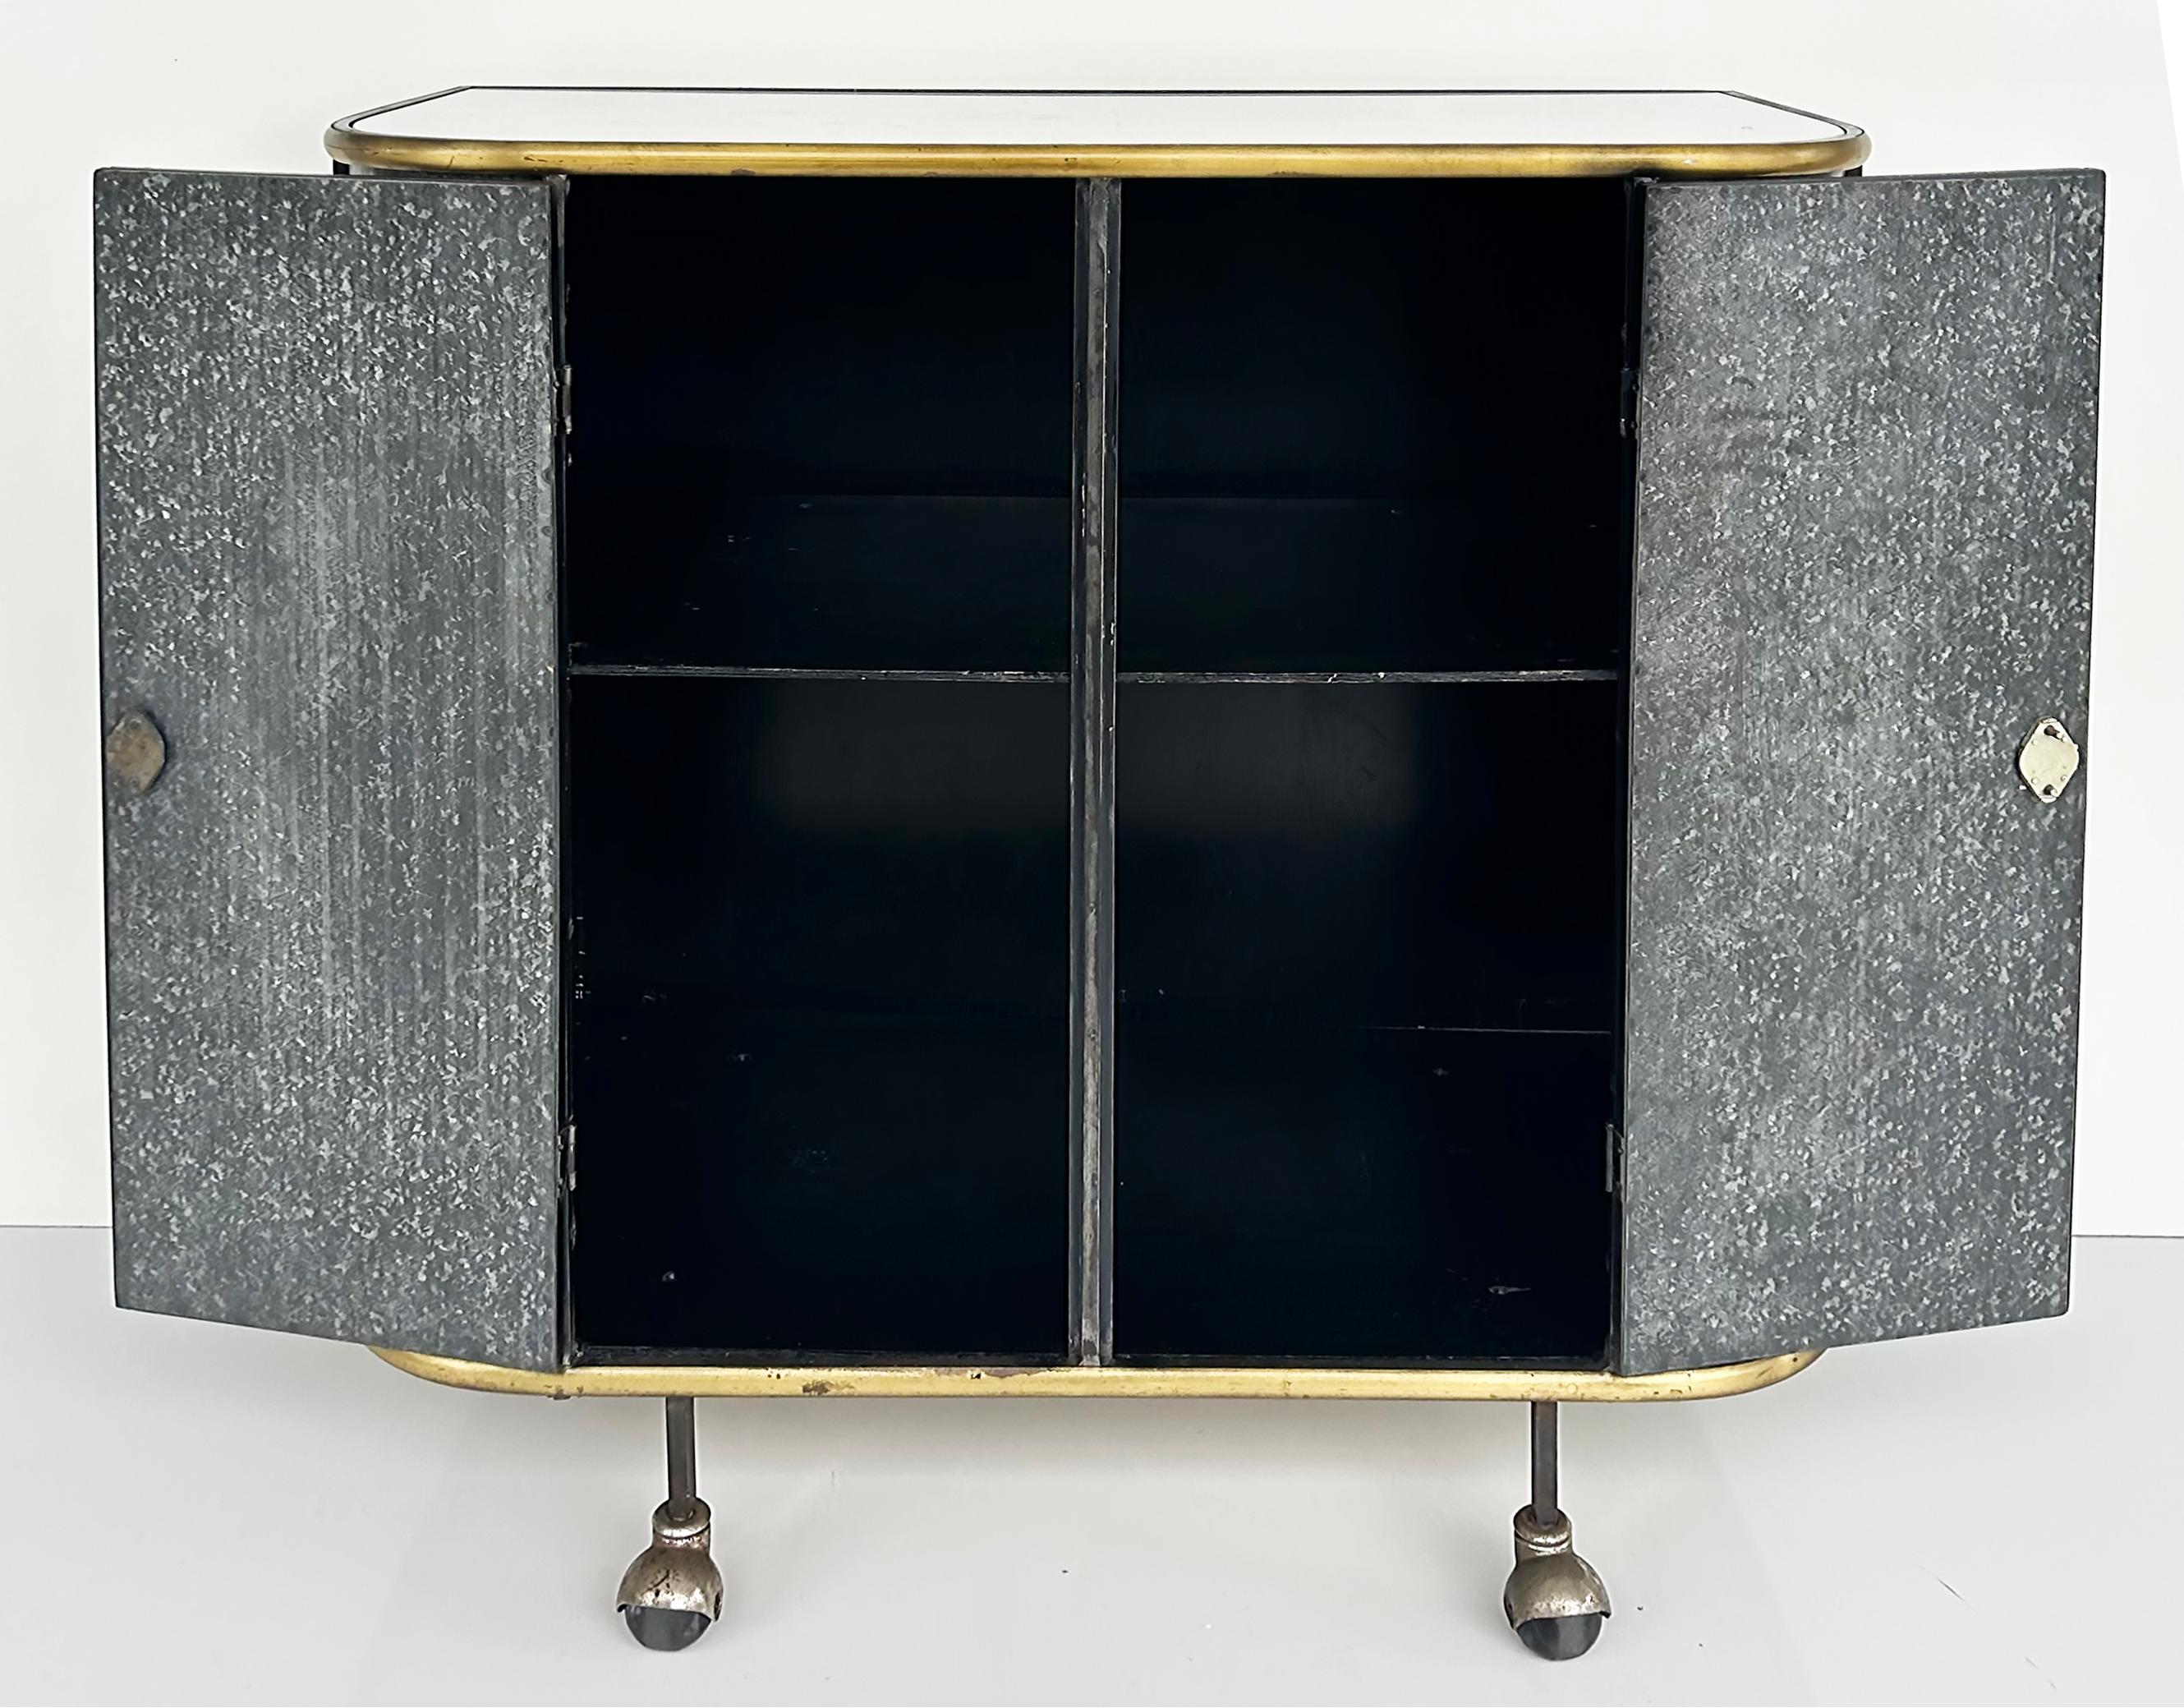 20th Century Vintage Neo-classical Iron, Brass, Metal 2-door Cabinet or Dry Bar, Glass Top  For Sale